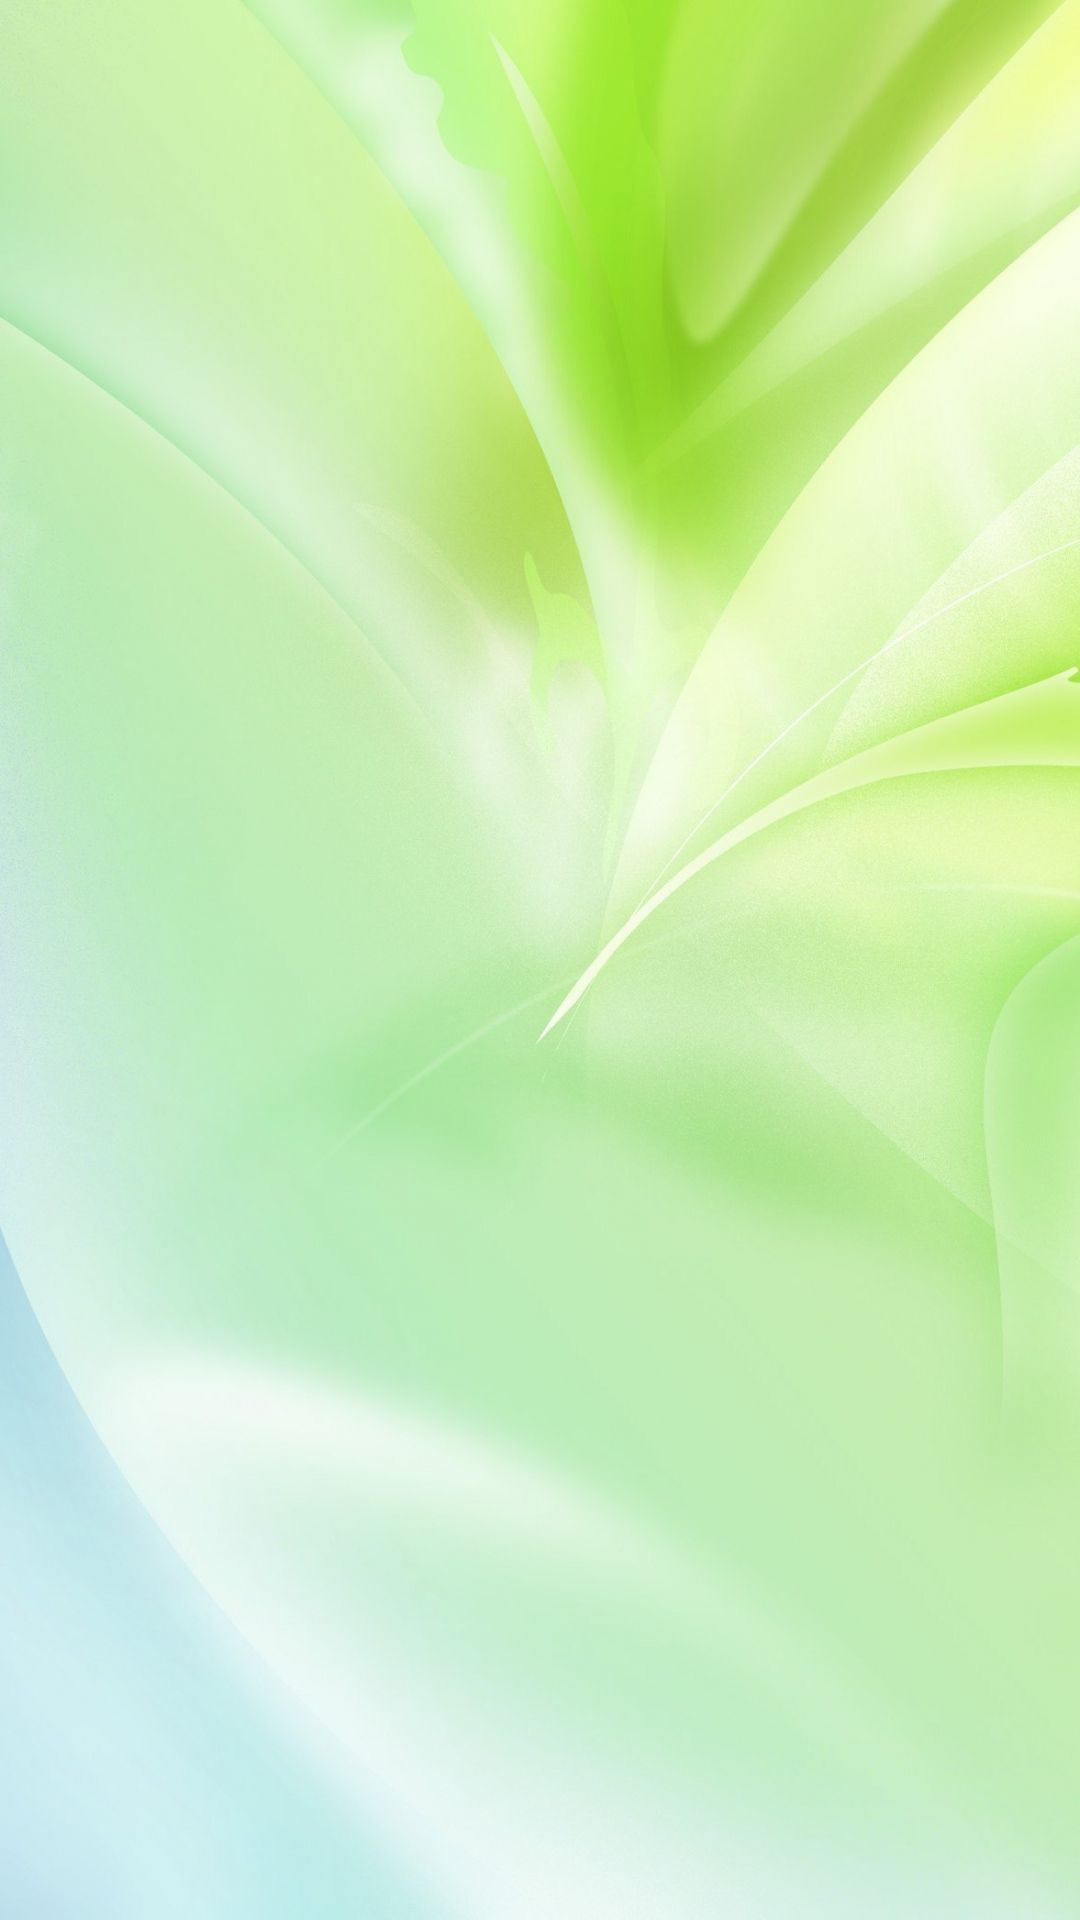 Green leaves abstract wallpaper for your iPhone 8 from Everpix - Lime green, soft green